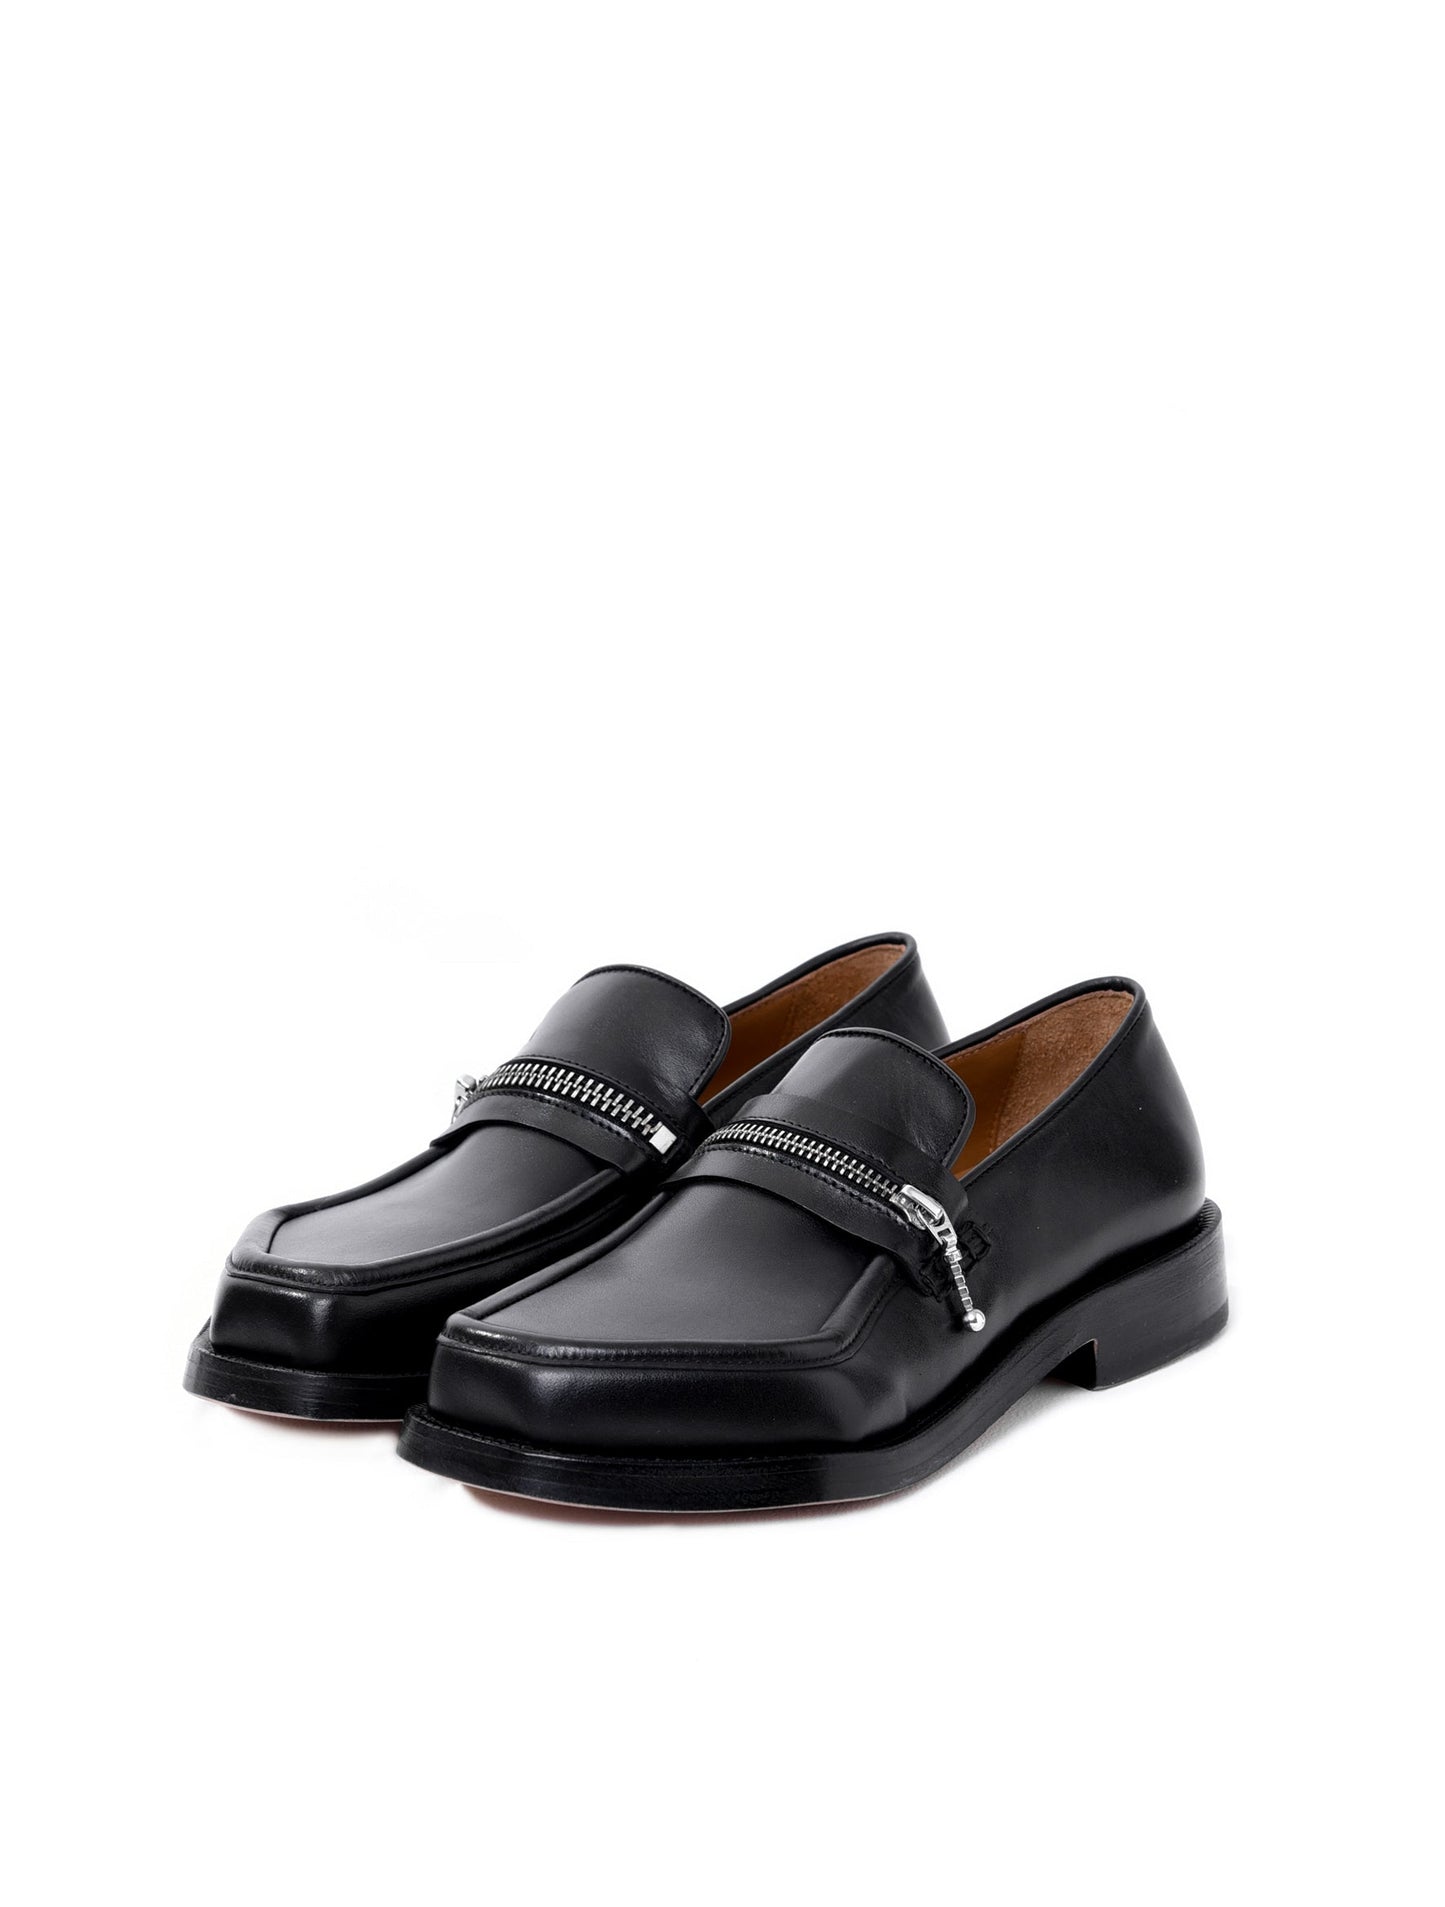 Magliano Black Classic Monster Loafer